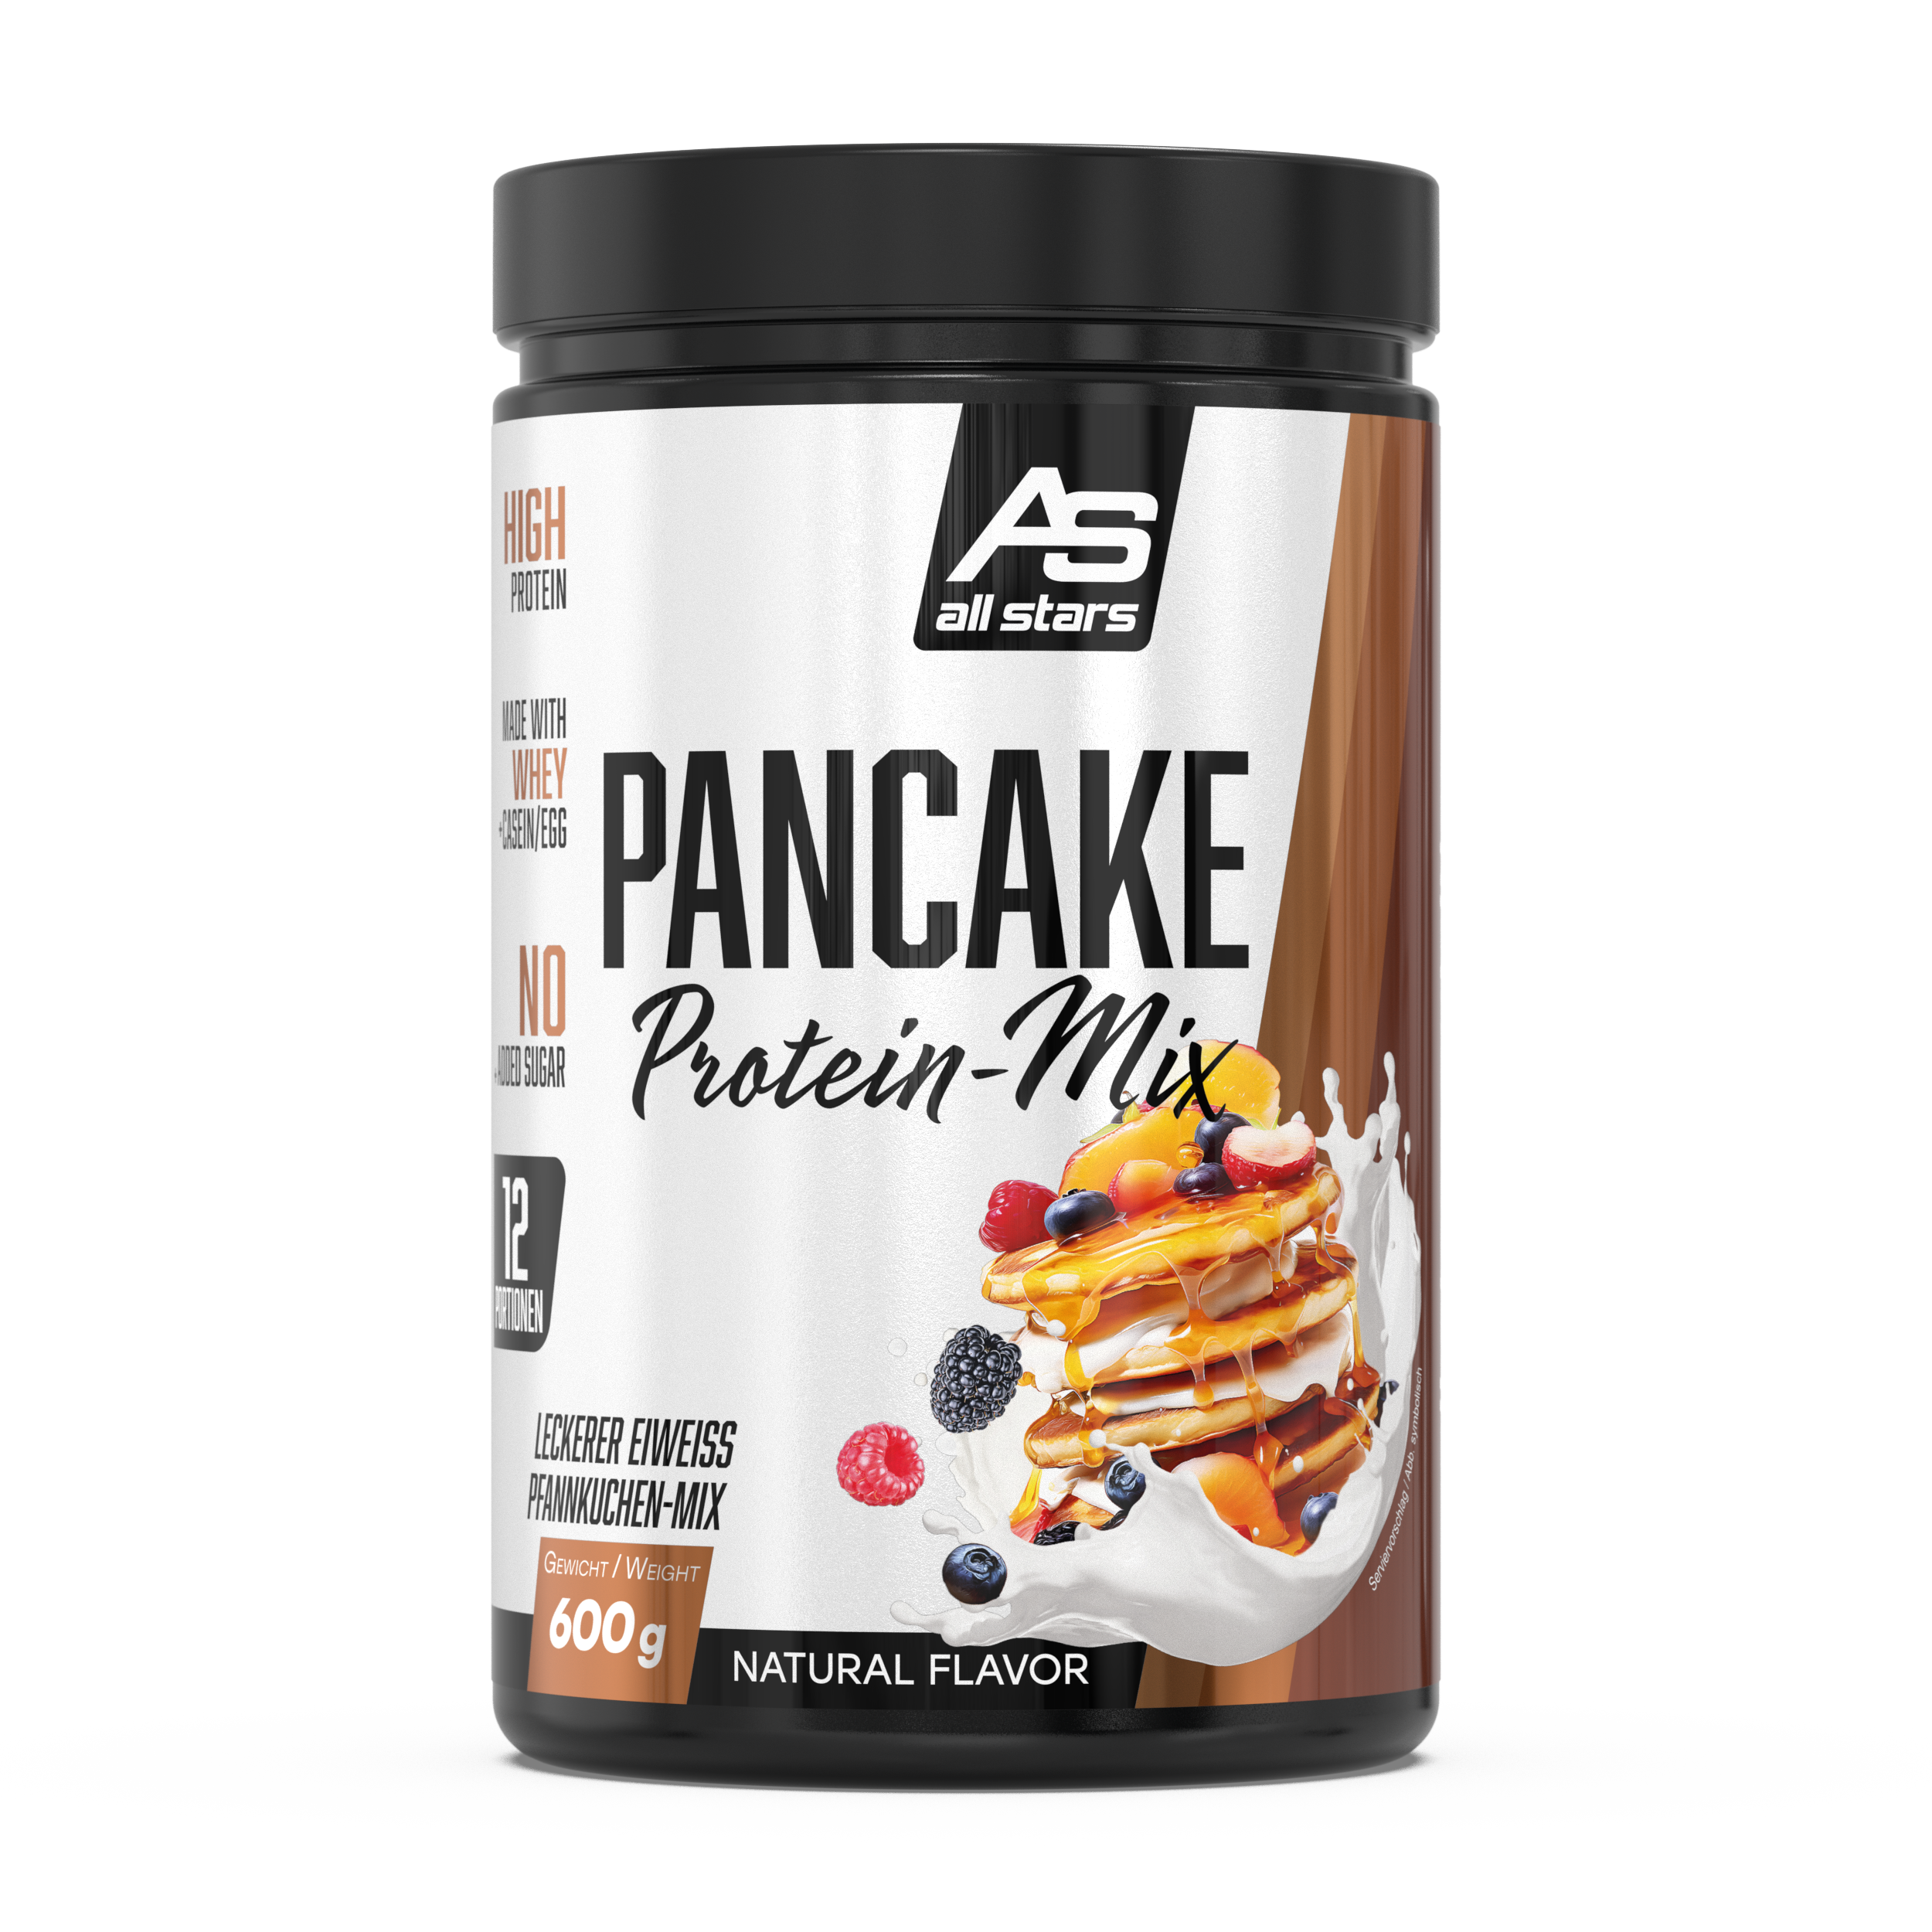 ALL STARS Pancake Protein-Mix - 600g Dose